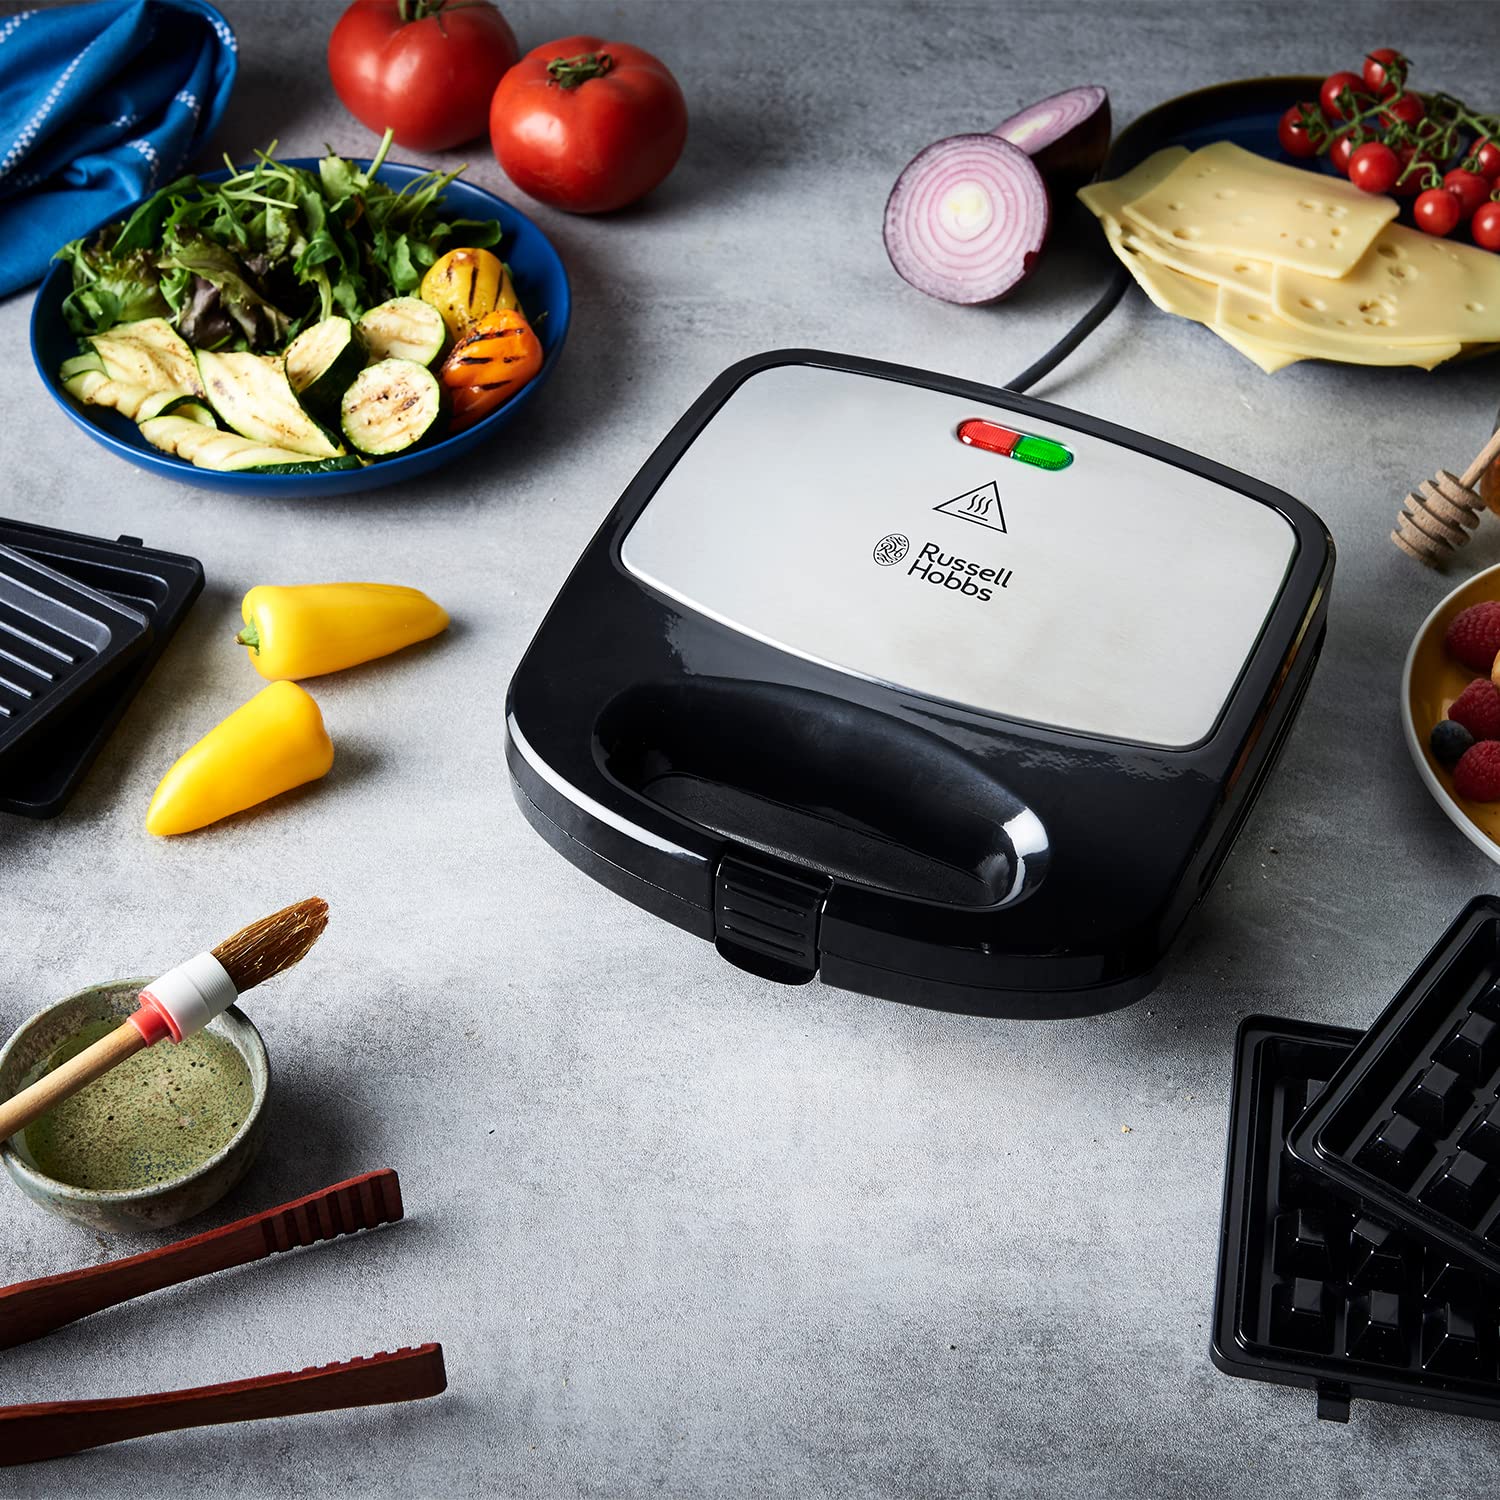 Russell Hobbs 3-In-1 Sandwich/Panini And Waffle Maker Black, 24540